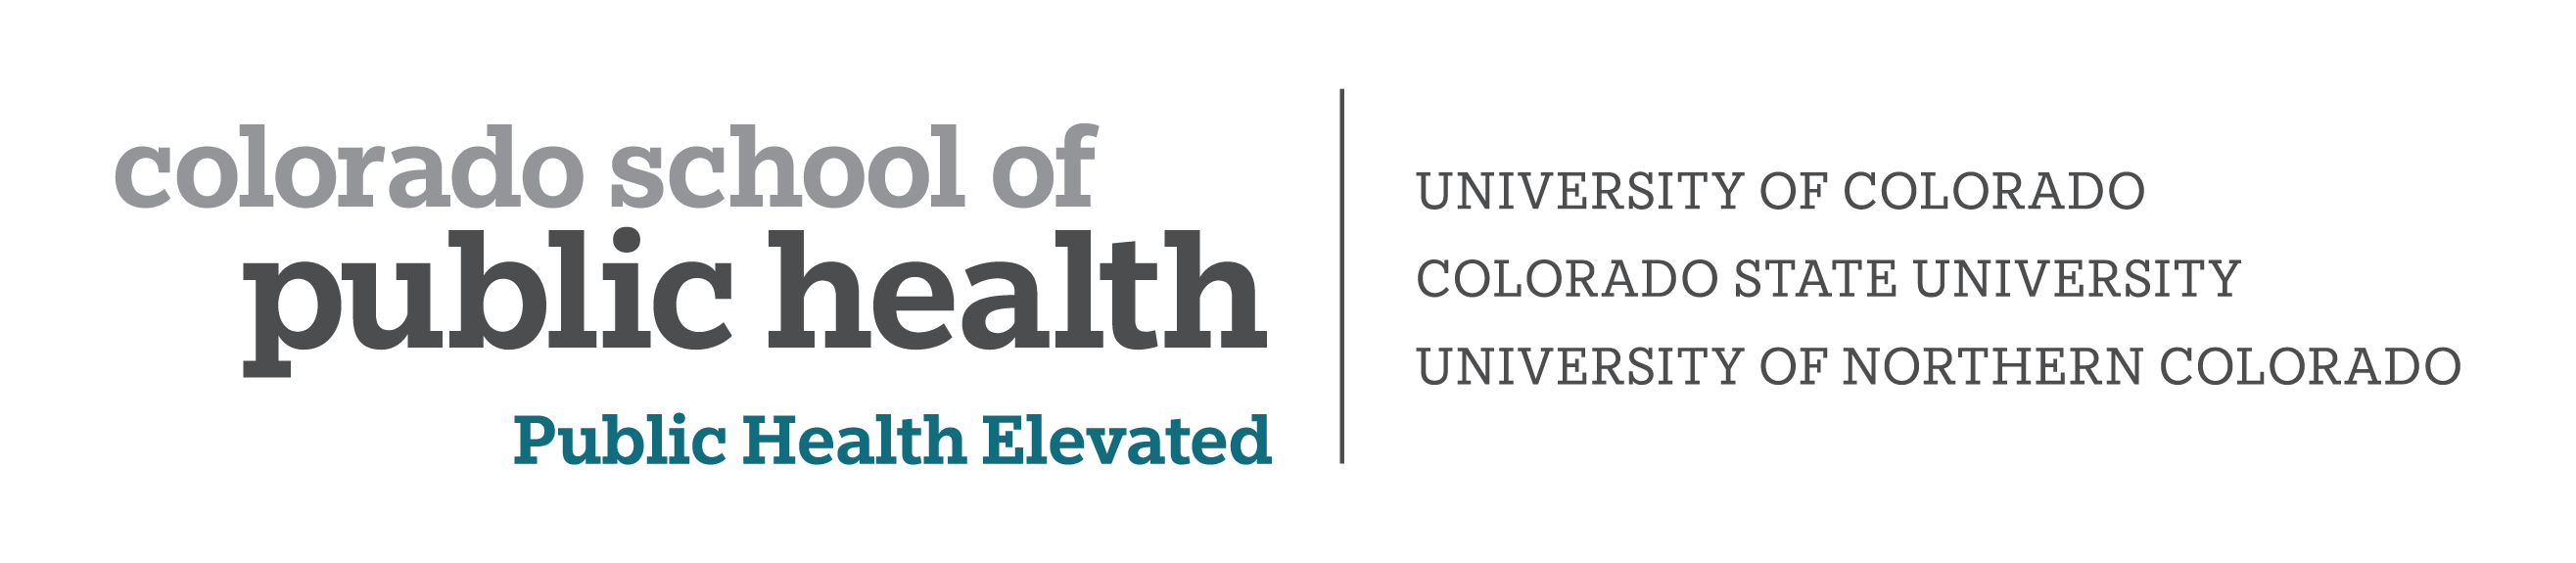 ColoradoSPH logo with blue font highlighting the new tag line 